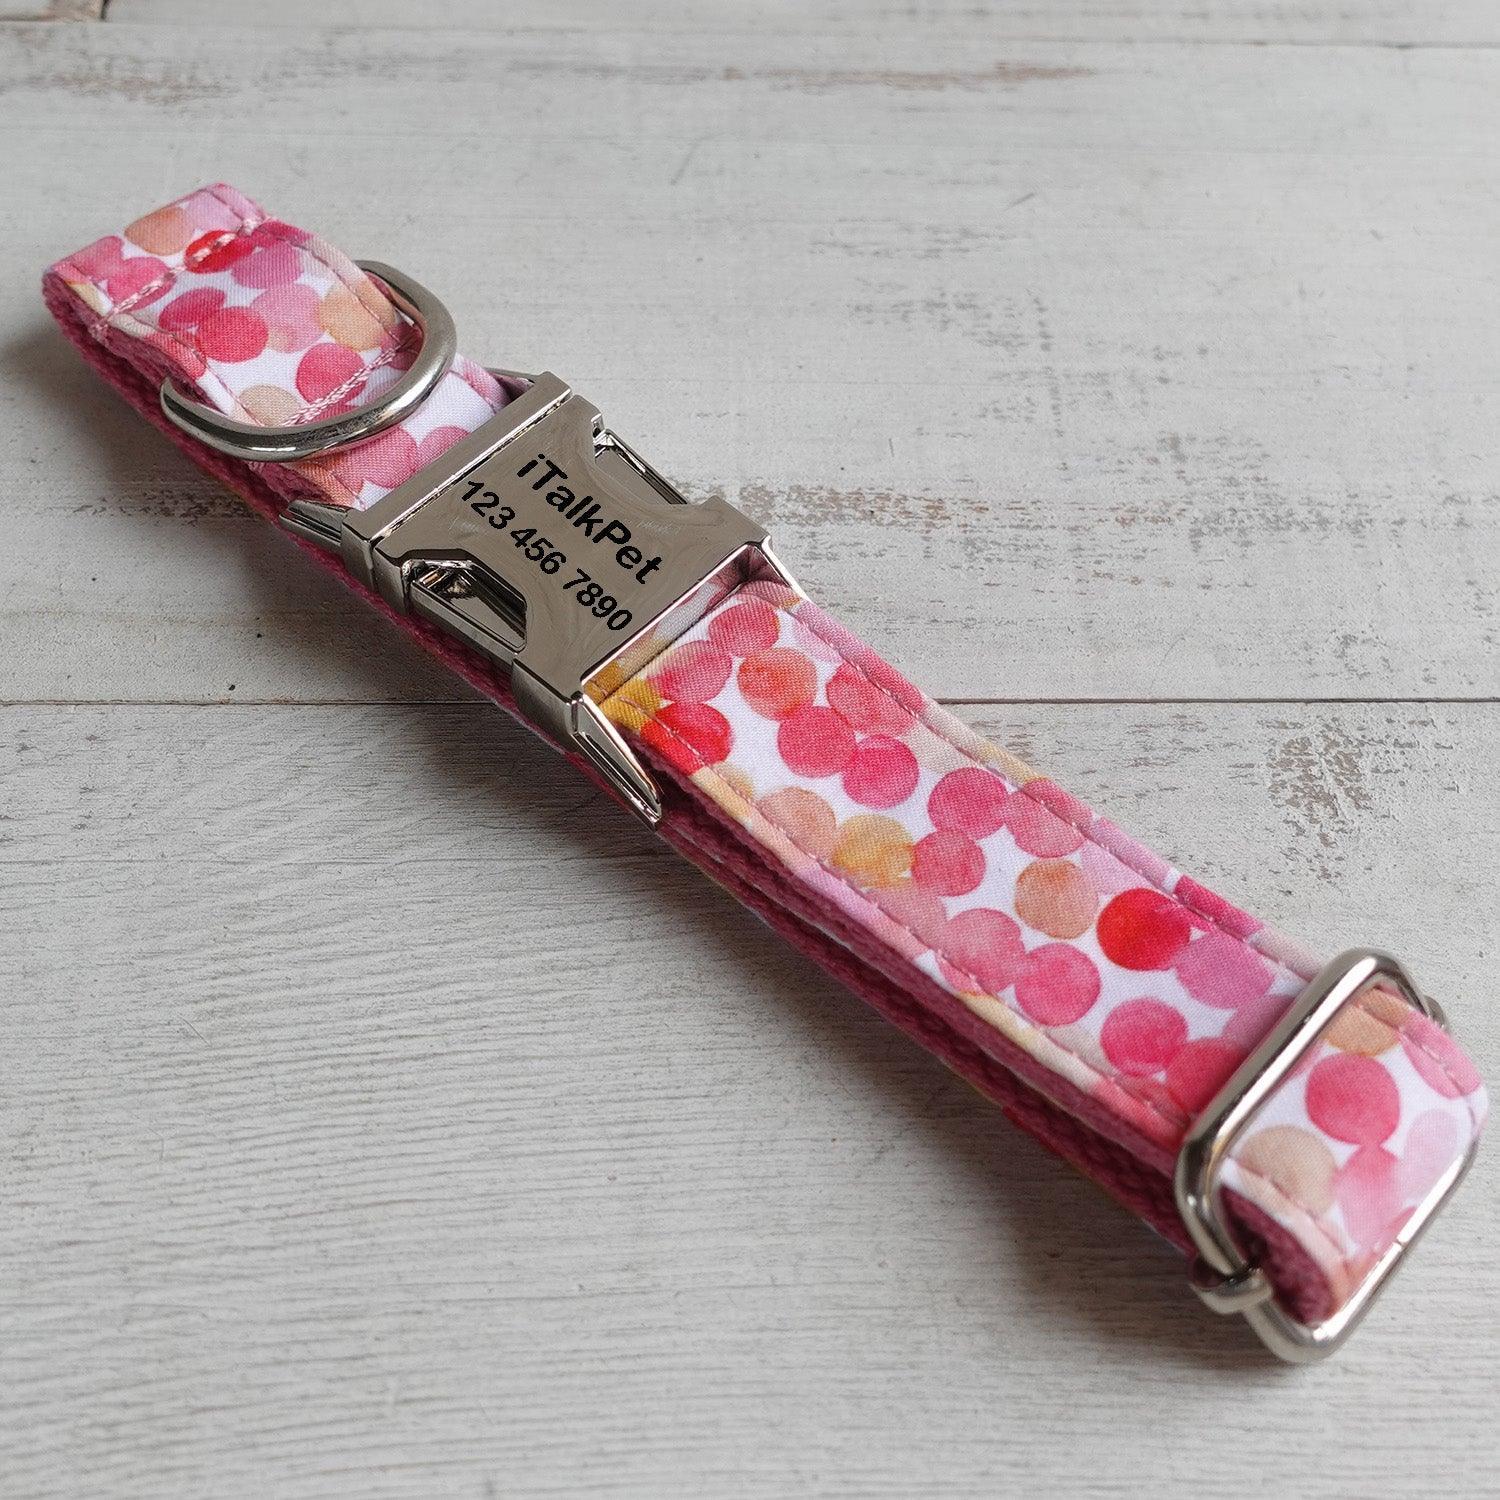 Bubbles Pink Personalized Dog Collar Set - iTalkPet